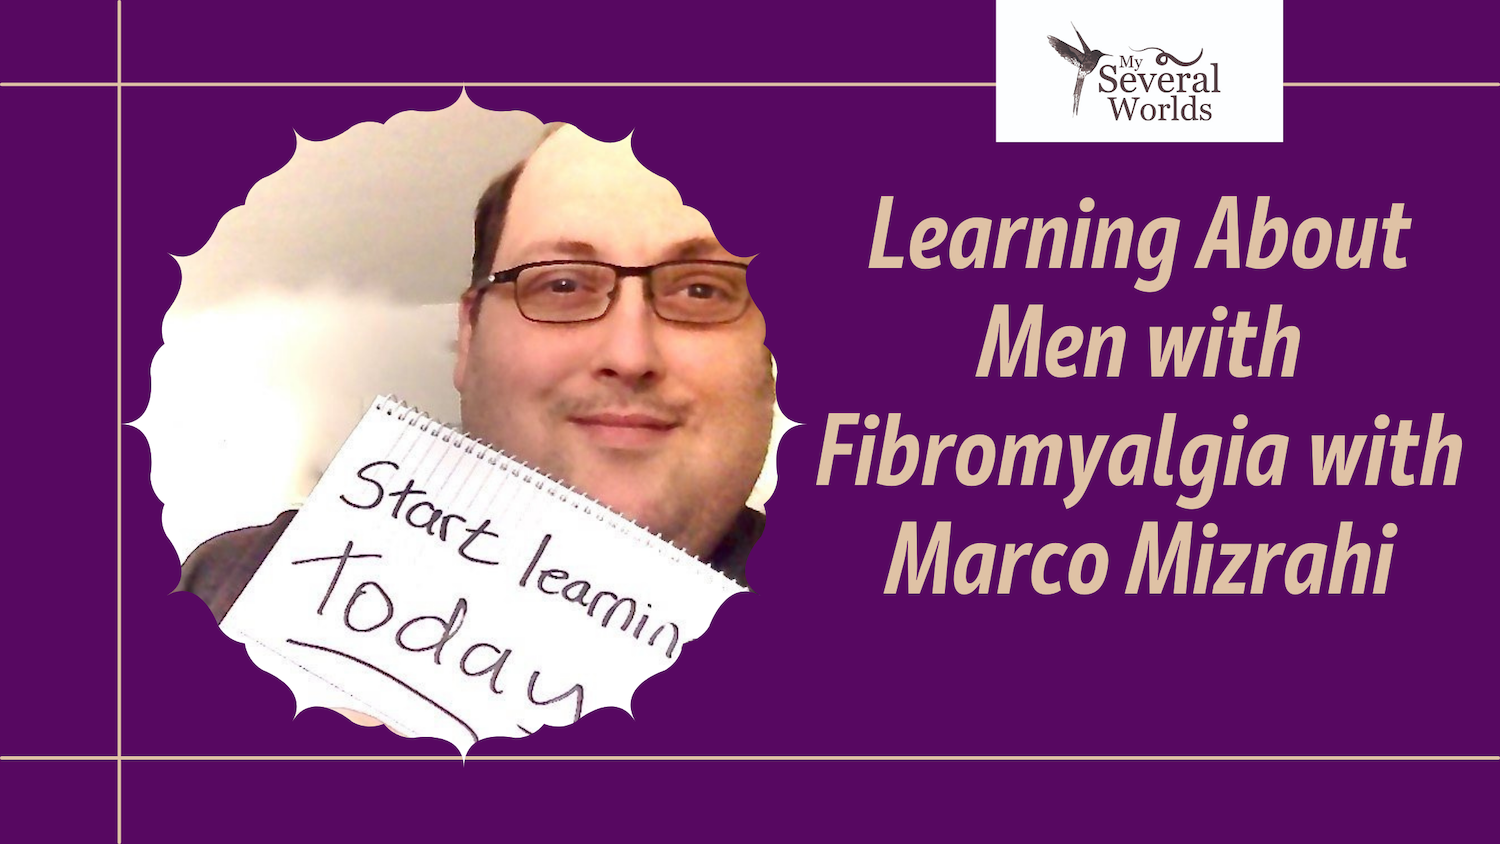 Learning About Men with Fibromyalgia with Marco Mizrahi